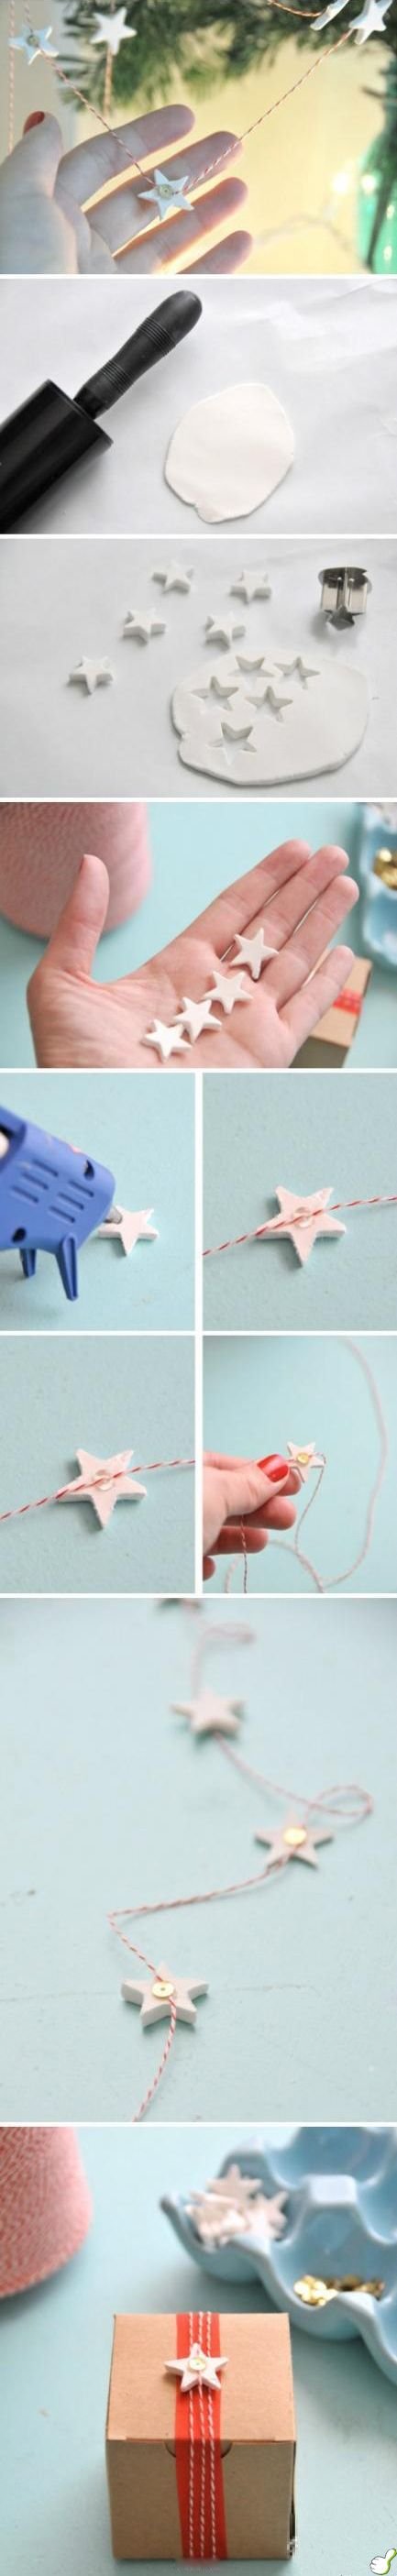 Scandinavian inspired star garland..totally going to twist this and use cinnamon dough during xmas to put on my tree!